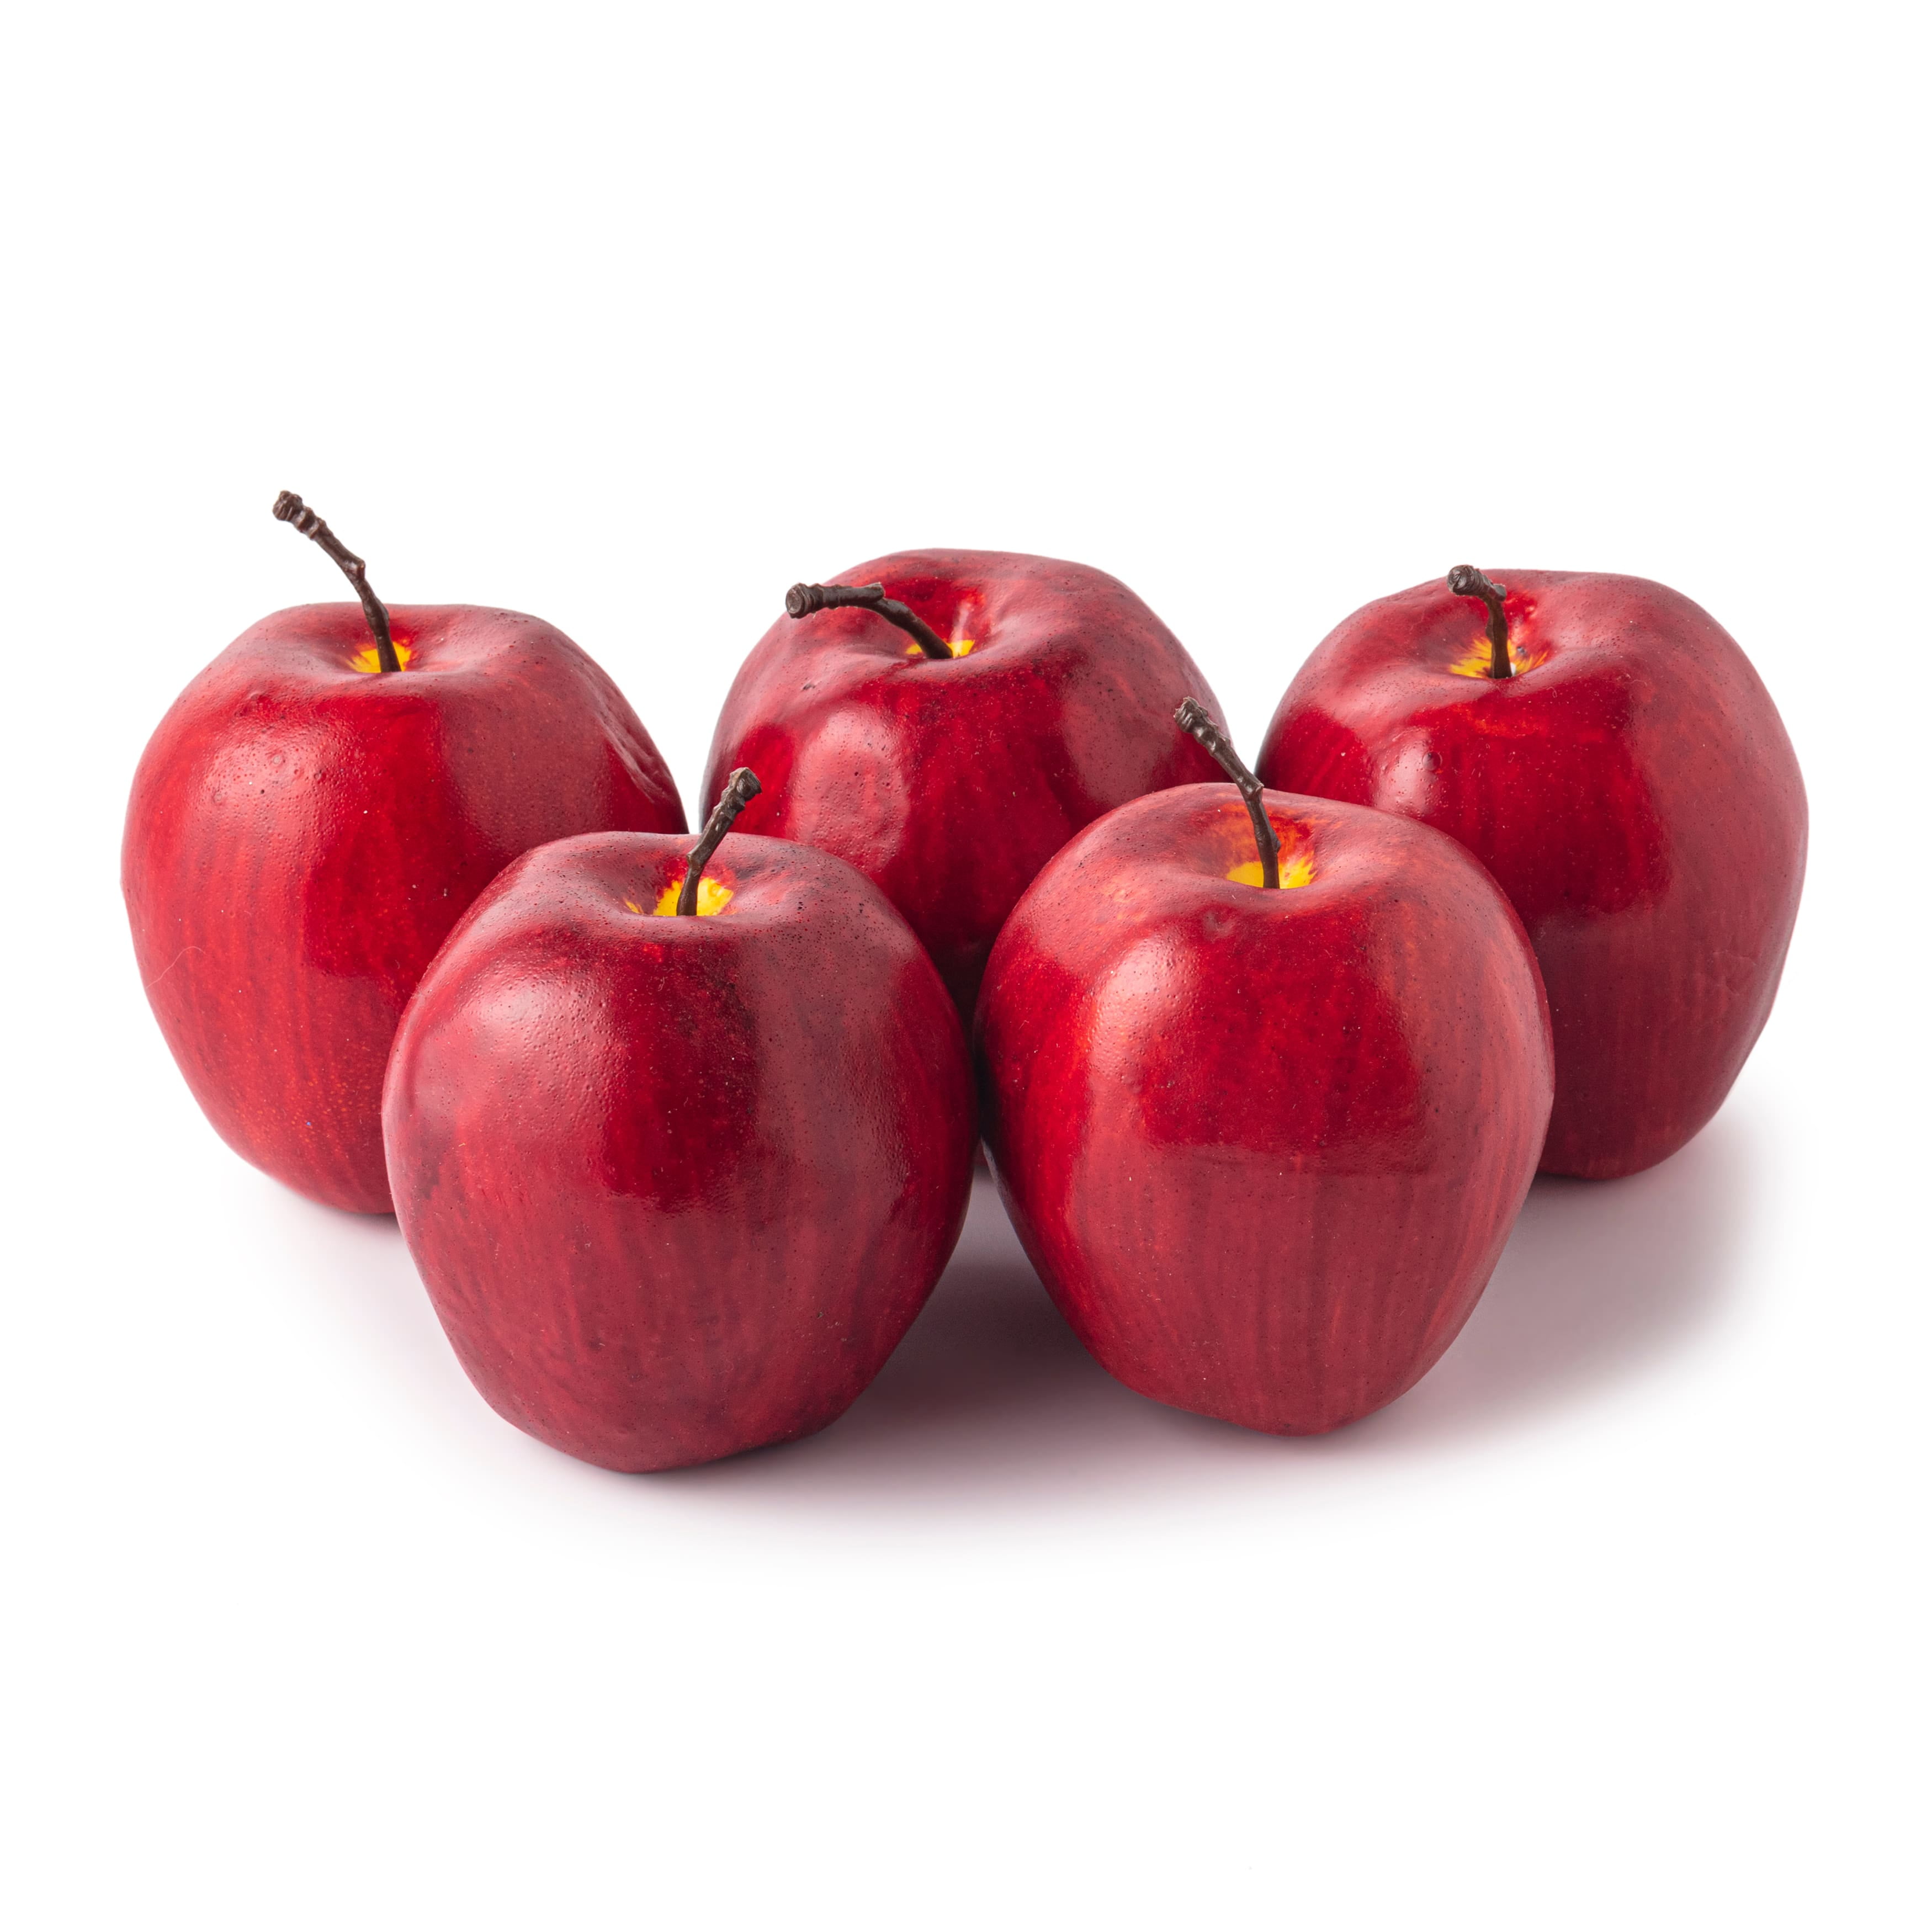 Fresh Red Delicious Apples, 5 lb Bag